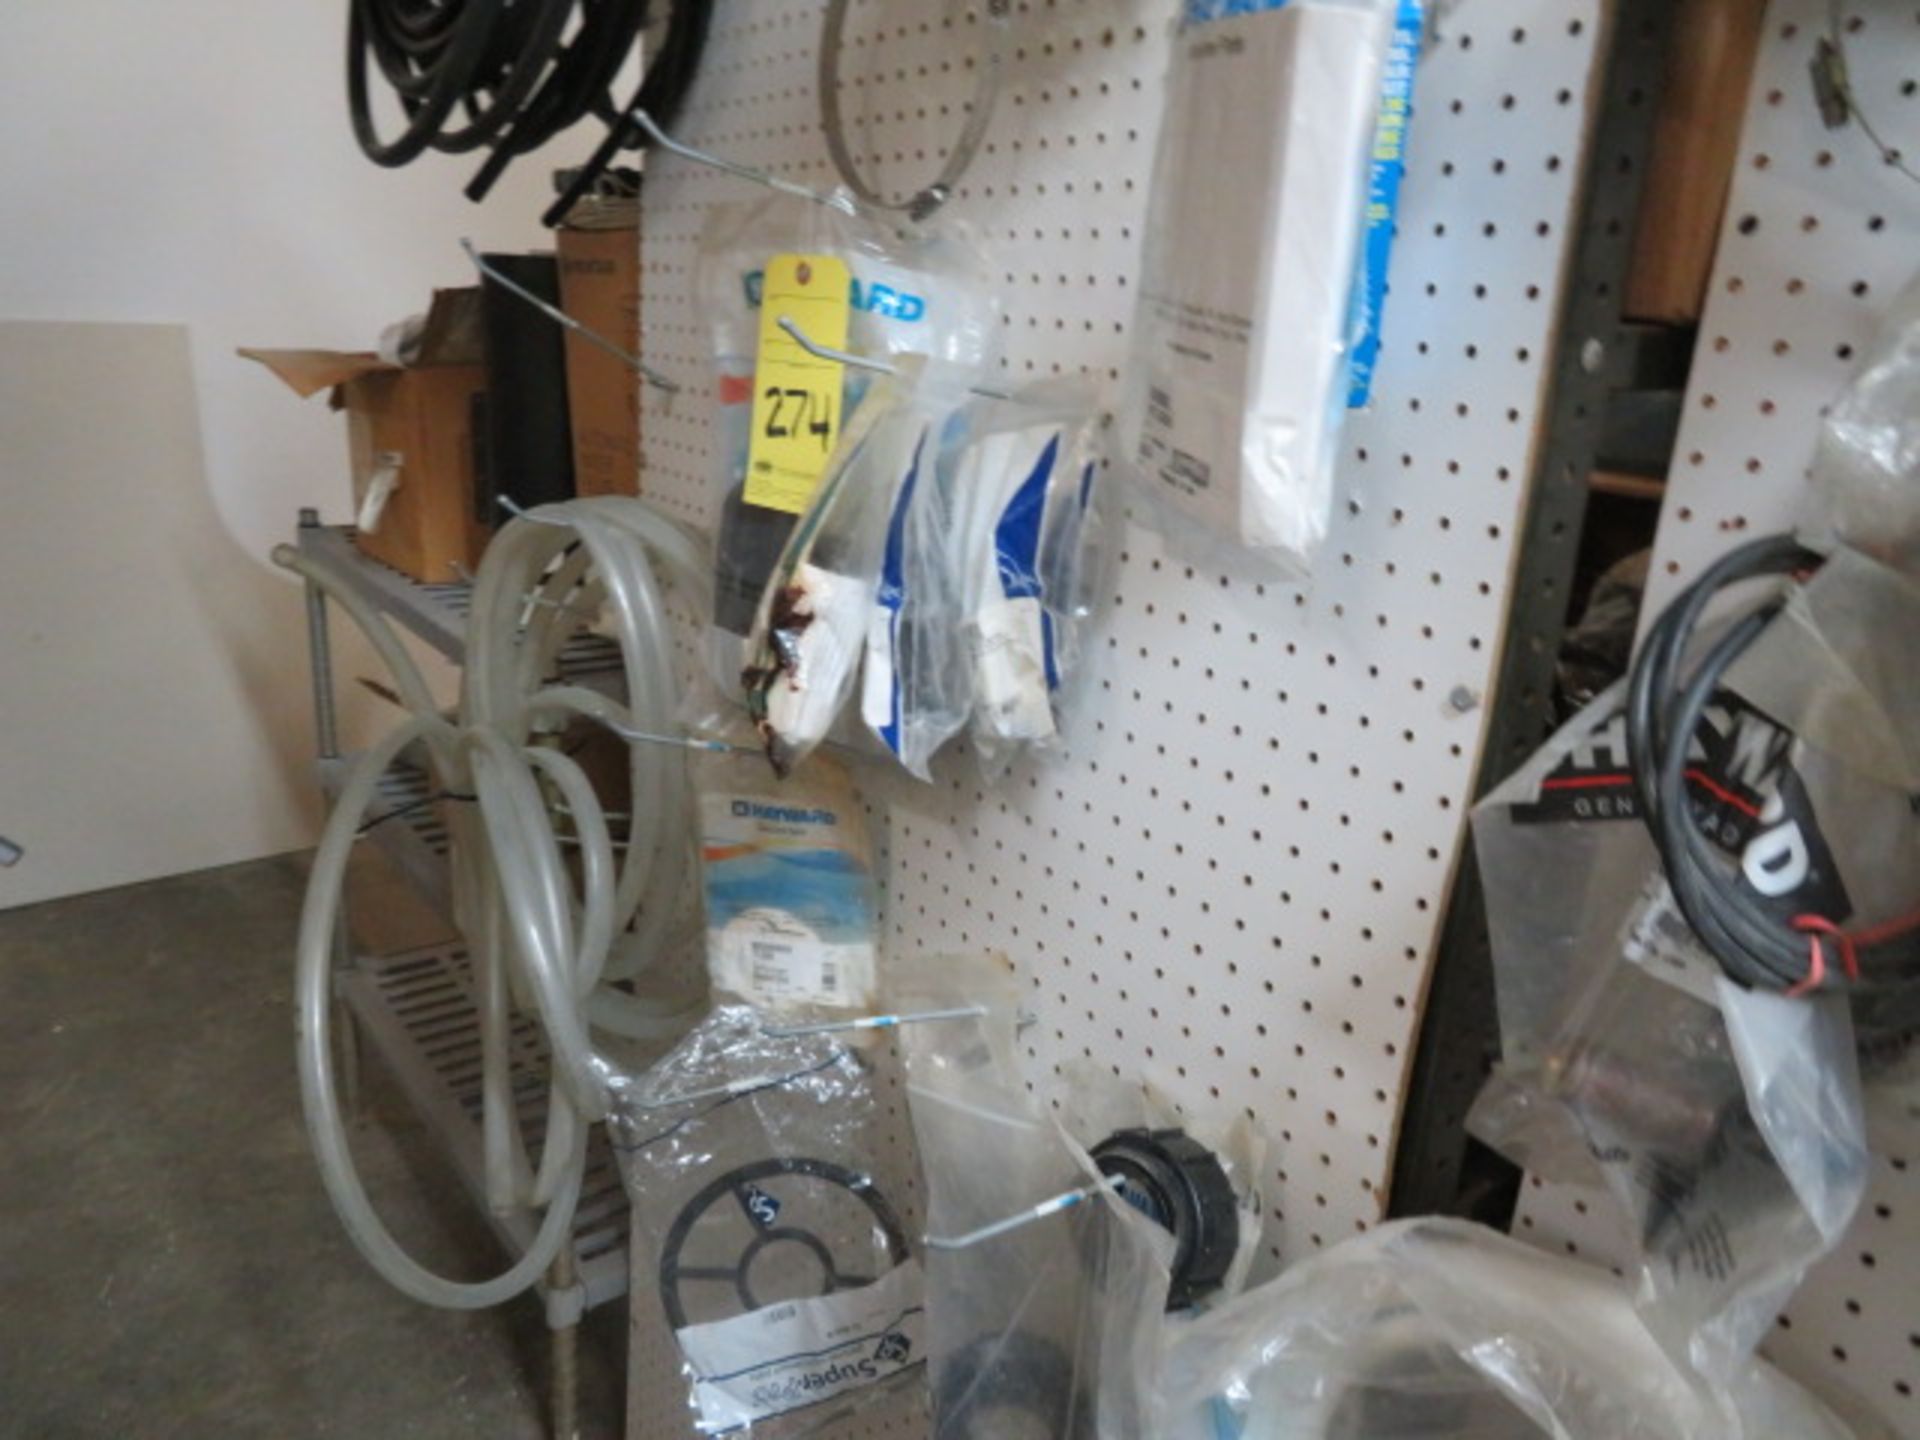 LOT CONSISTING OF: pool sweep, filter parts, pump parts, table chlorinator parts, assorted - Image 11 of 17